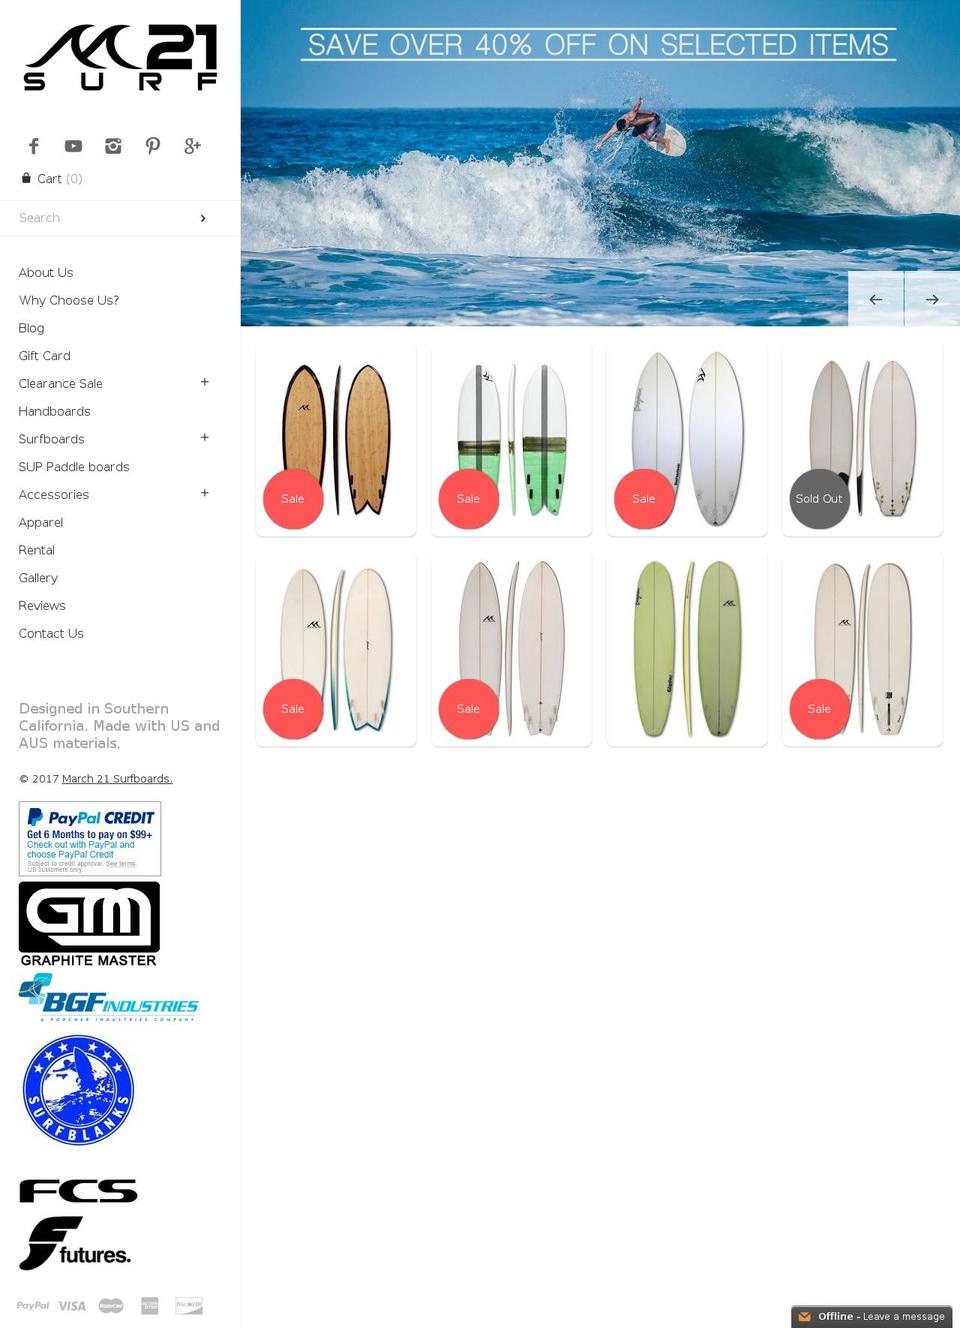 Sports Shopify theme site example march21surfboards.com